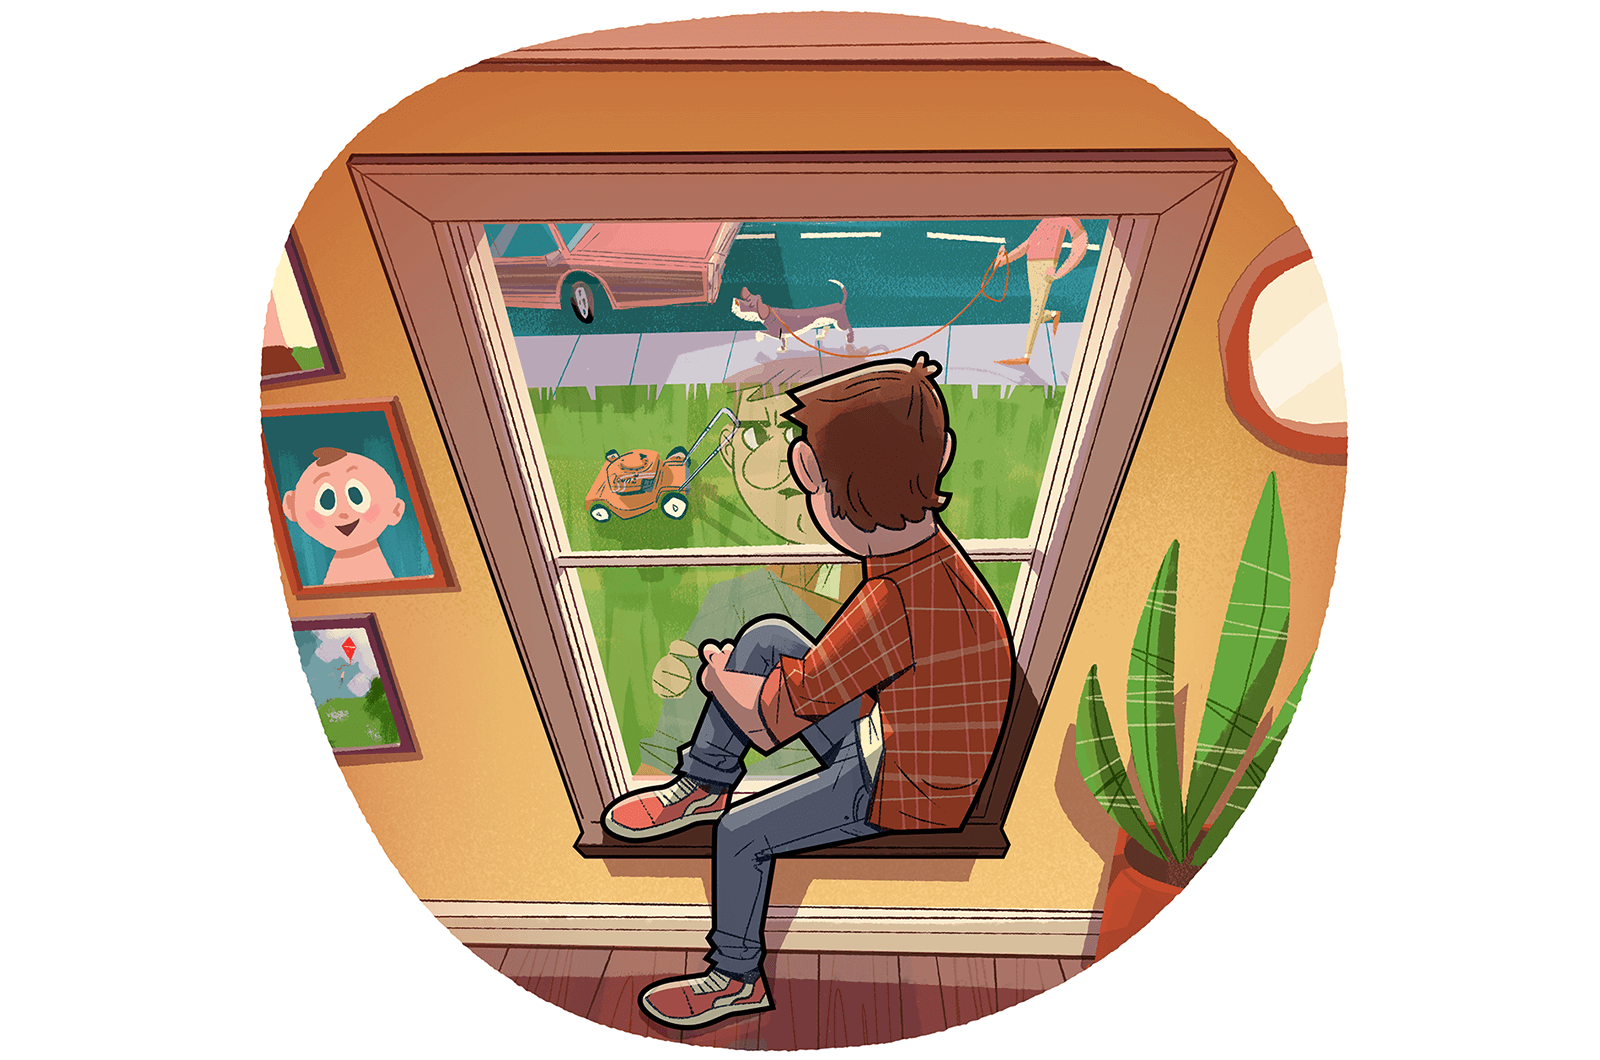 Illustration of man looking out window at yard